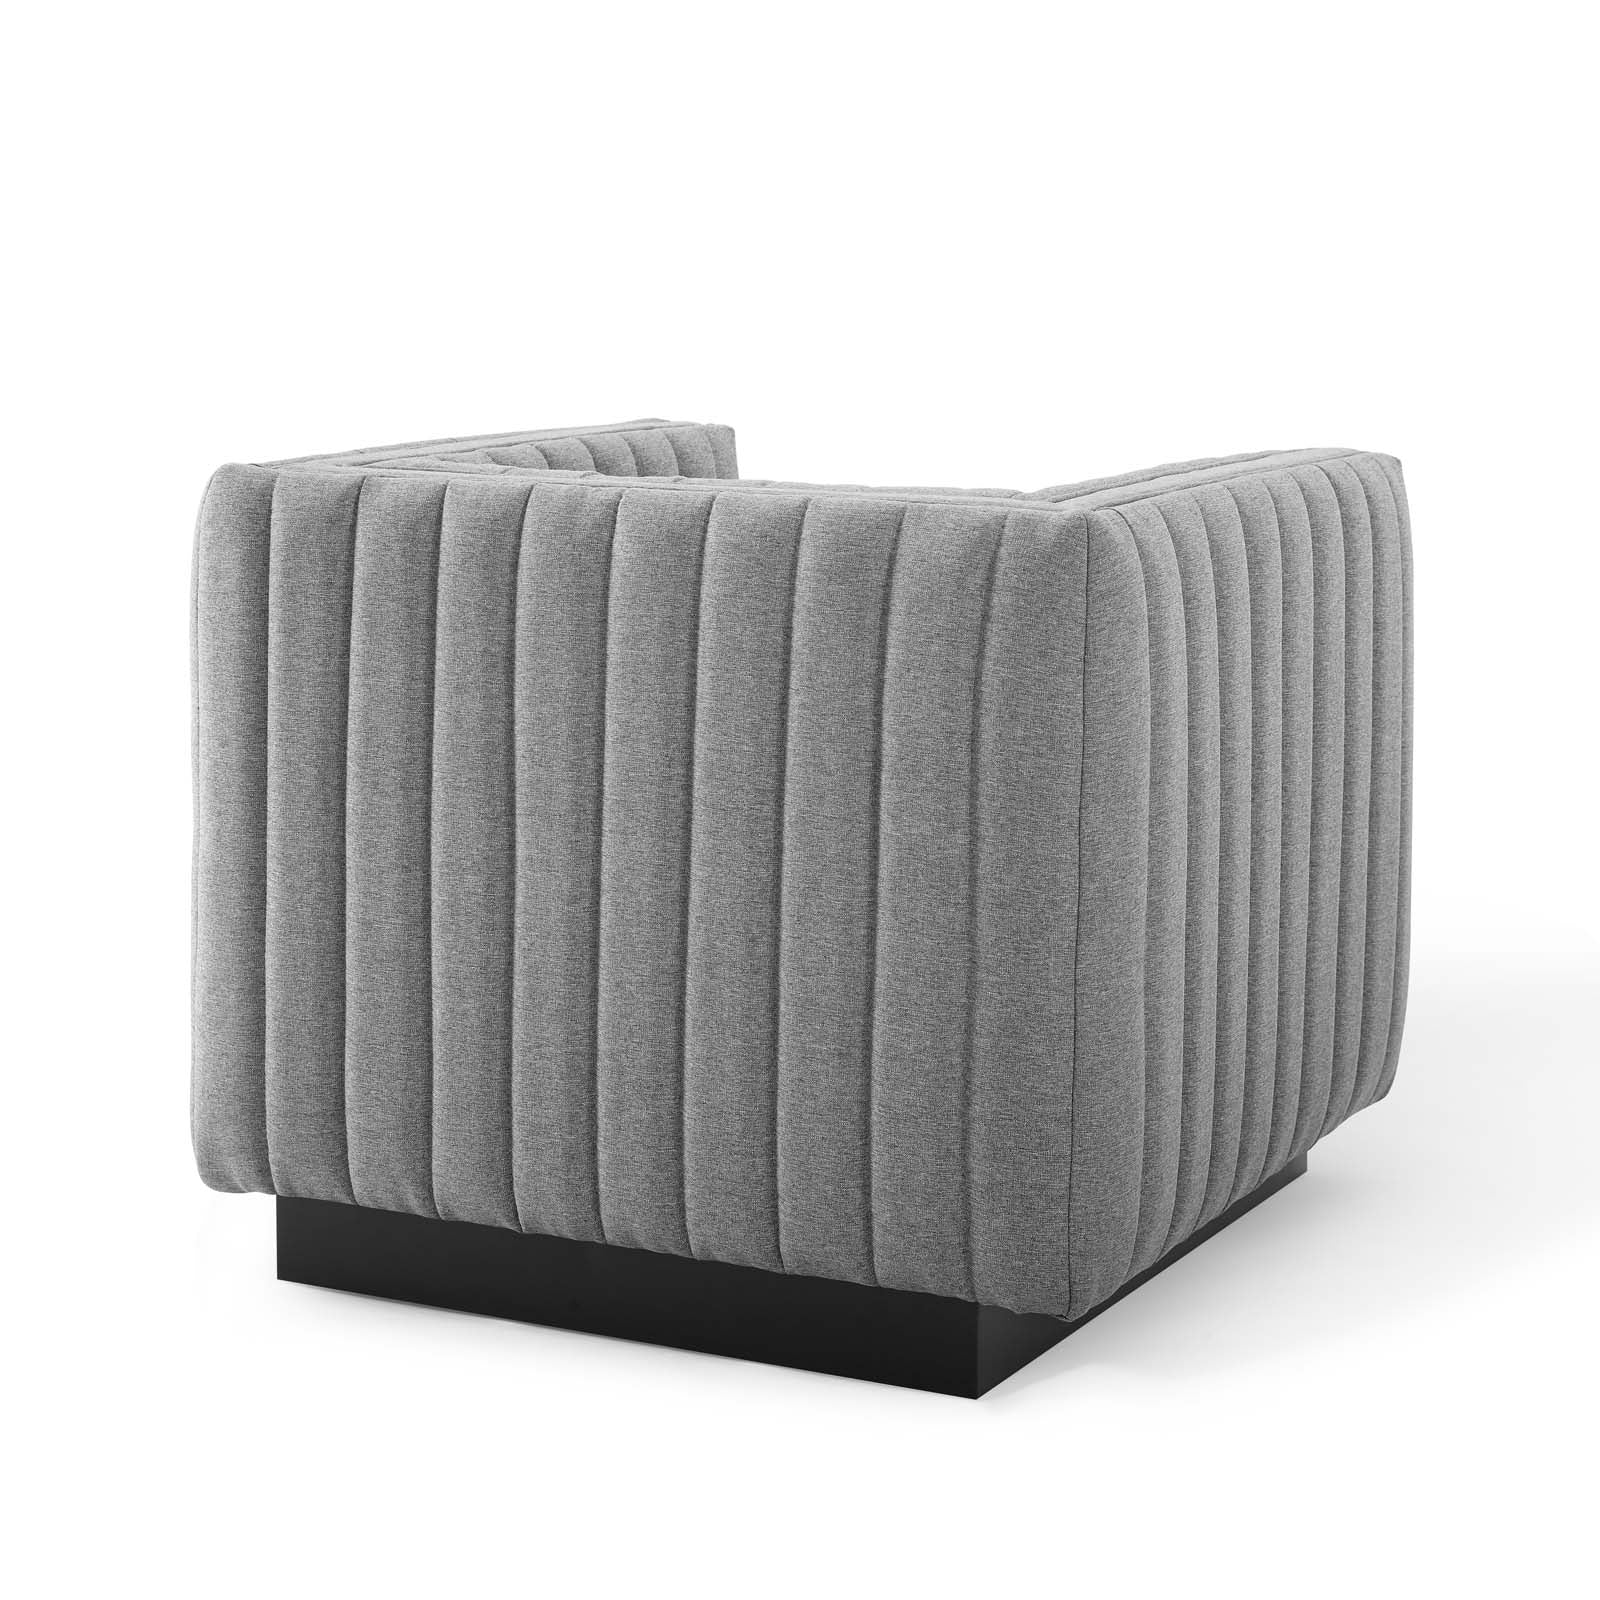 Conjure Tufted Armchair Upholstered Fabric Set of 2-Sofa Set-Modway-Wall2Wall Furnishings